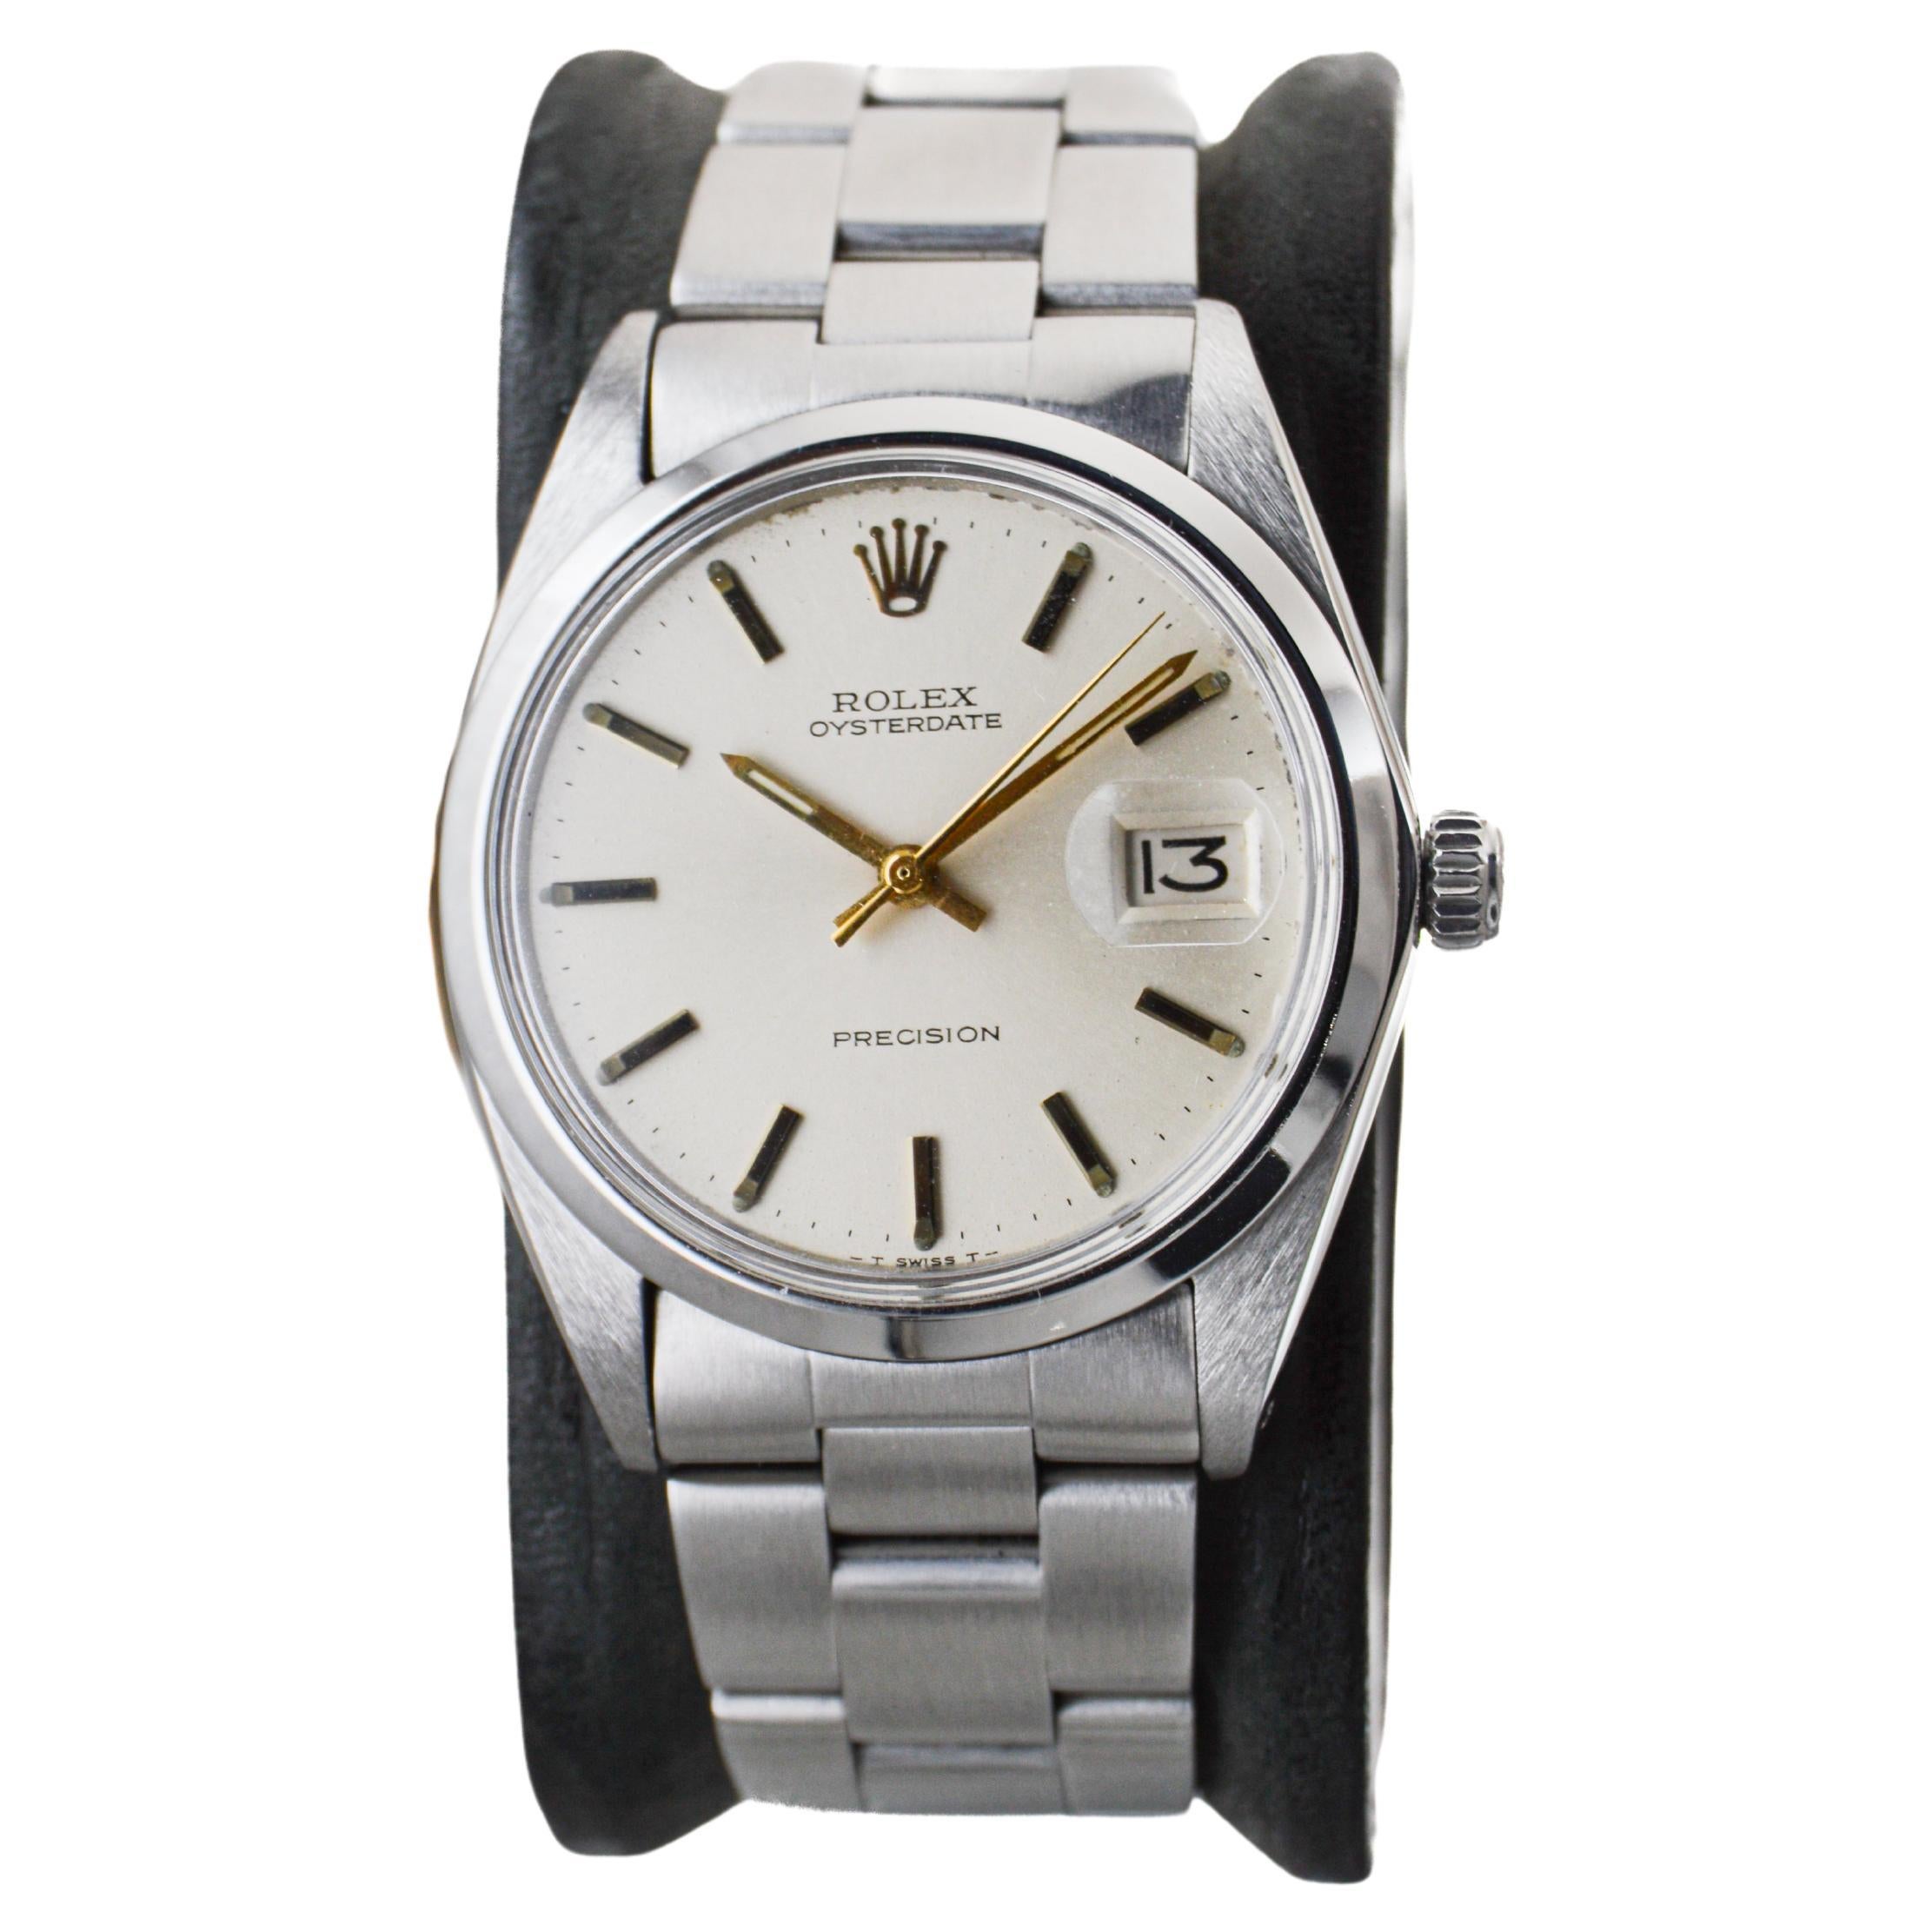 Rolex Stainless Steel Oysterdate with Factory Original Silver Dial circa, 1960's In Excellent Condition For Sale In Long Beach, CA